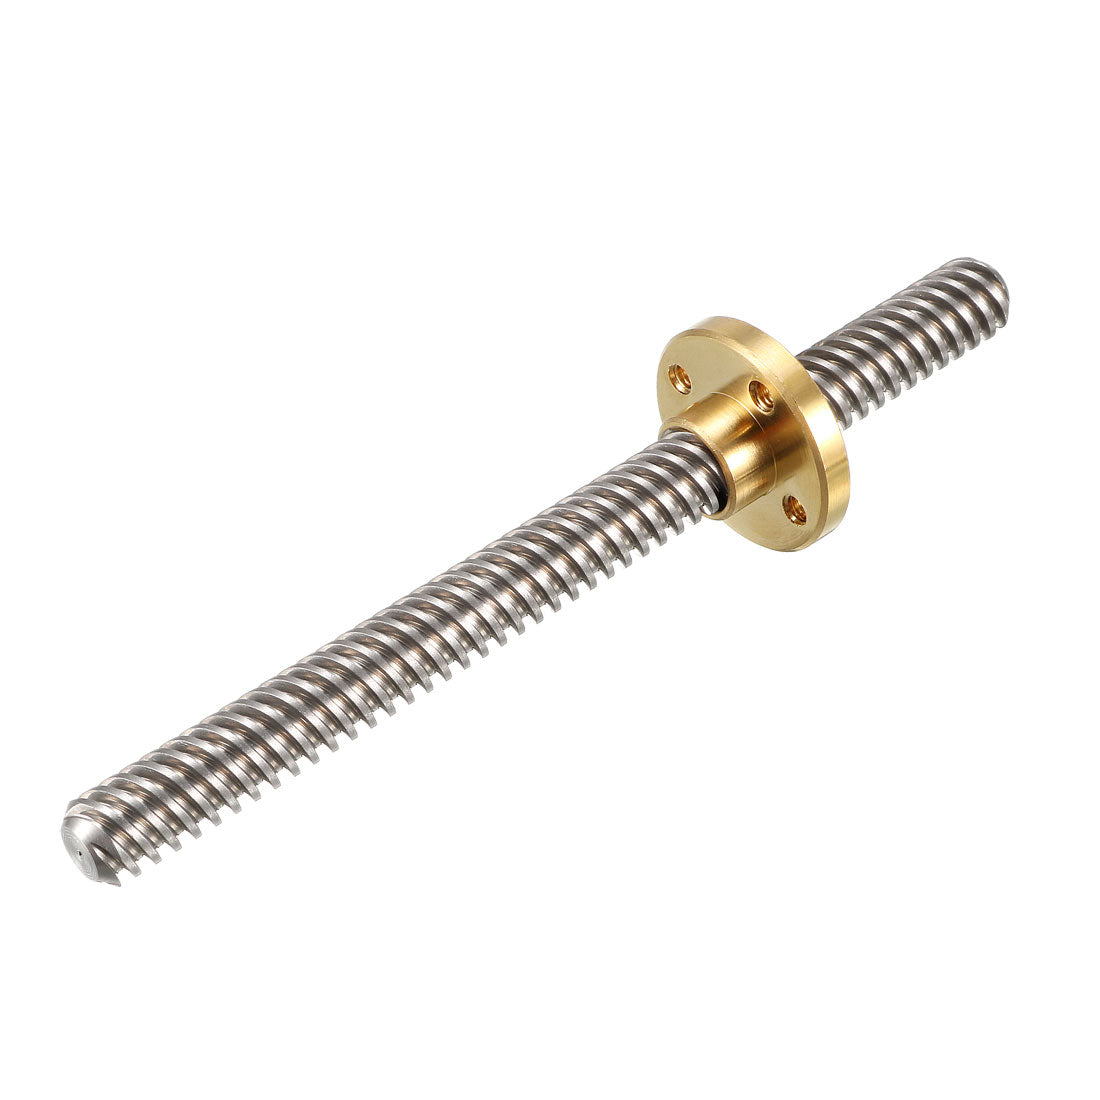 uxcell Uxcell 100mm T8 Pitch 8mm Lead 8mm Lead Screw Rod with Copper Nut for 3D Printer